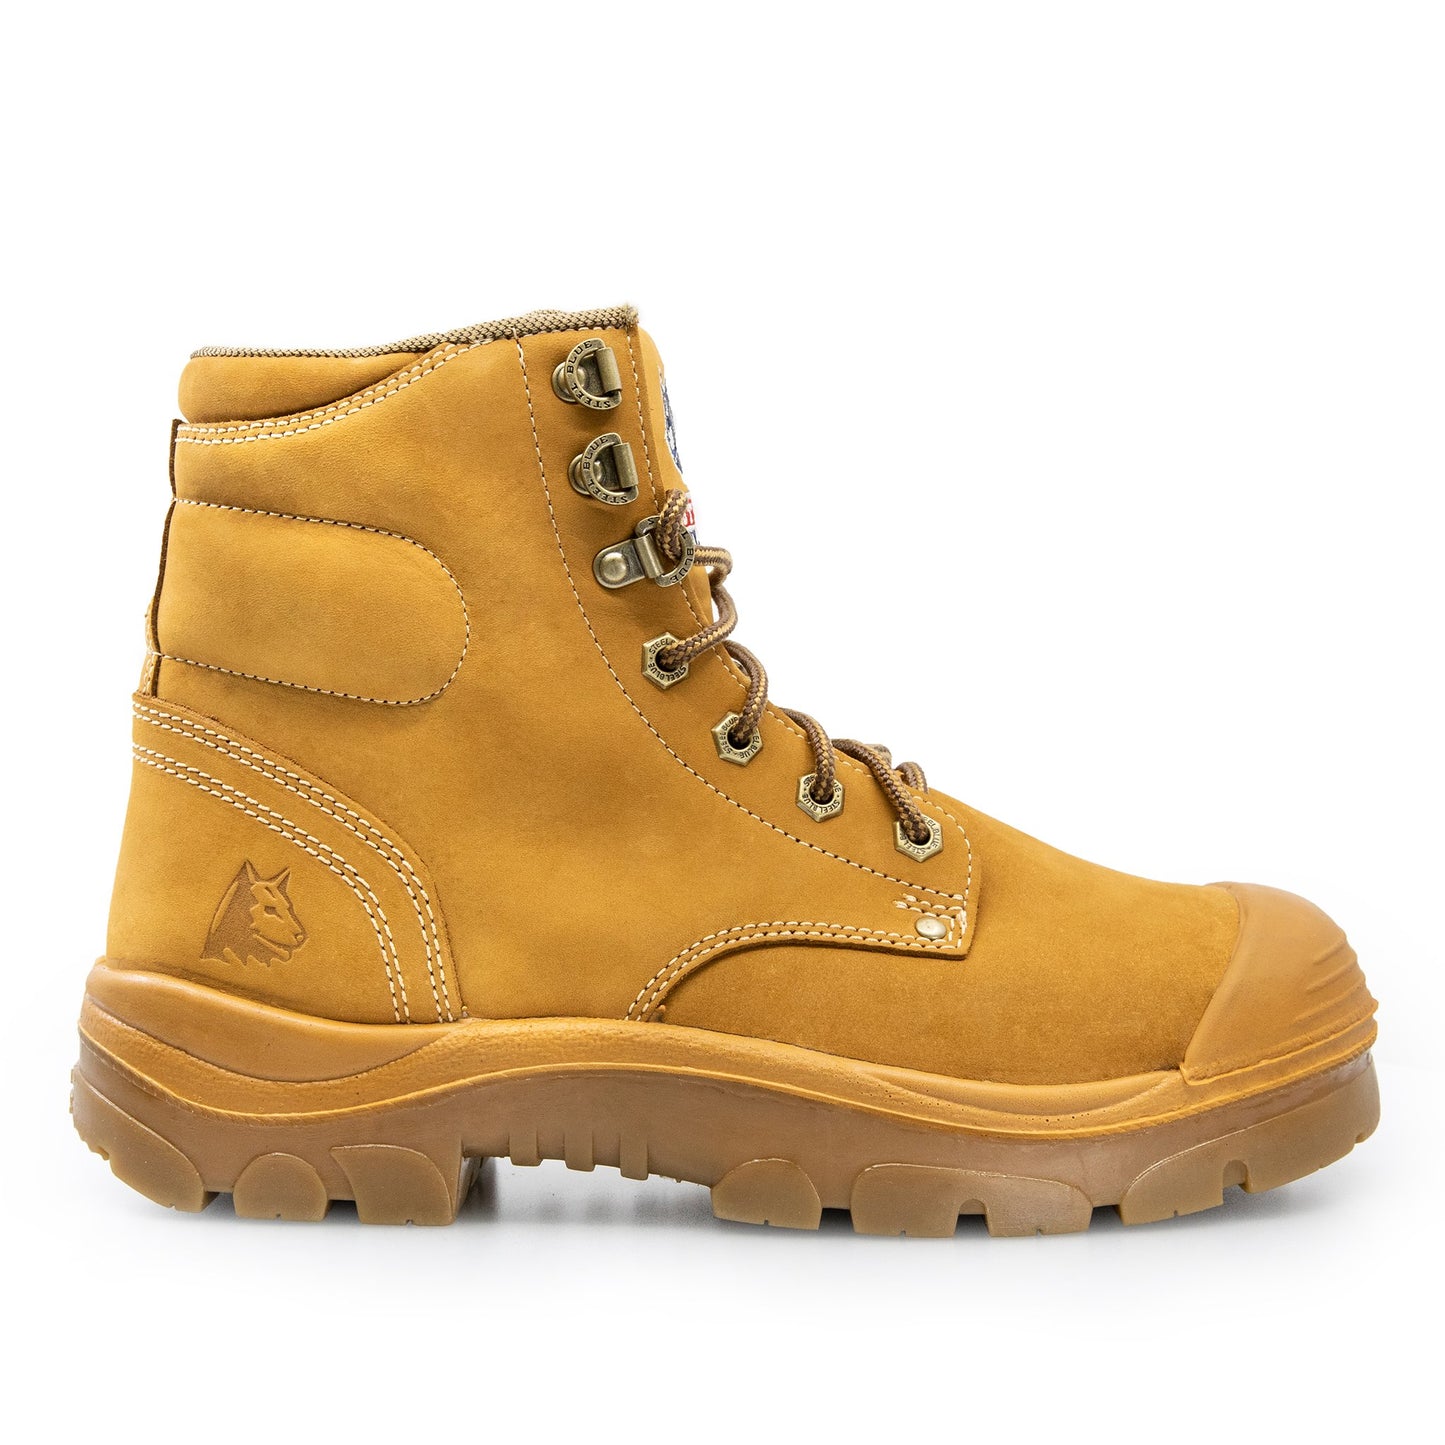  STEEL BLUE® WORK BOOTS ONLINE - WHEAT COLOUR, OUTER SIDE